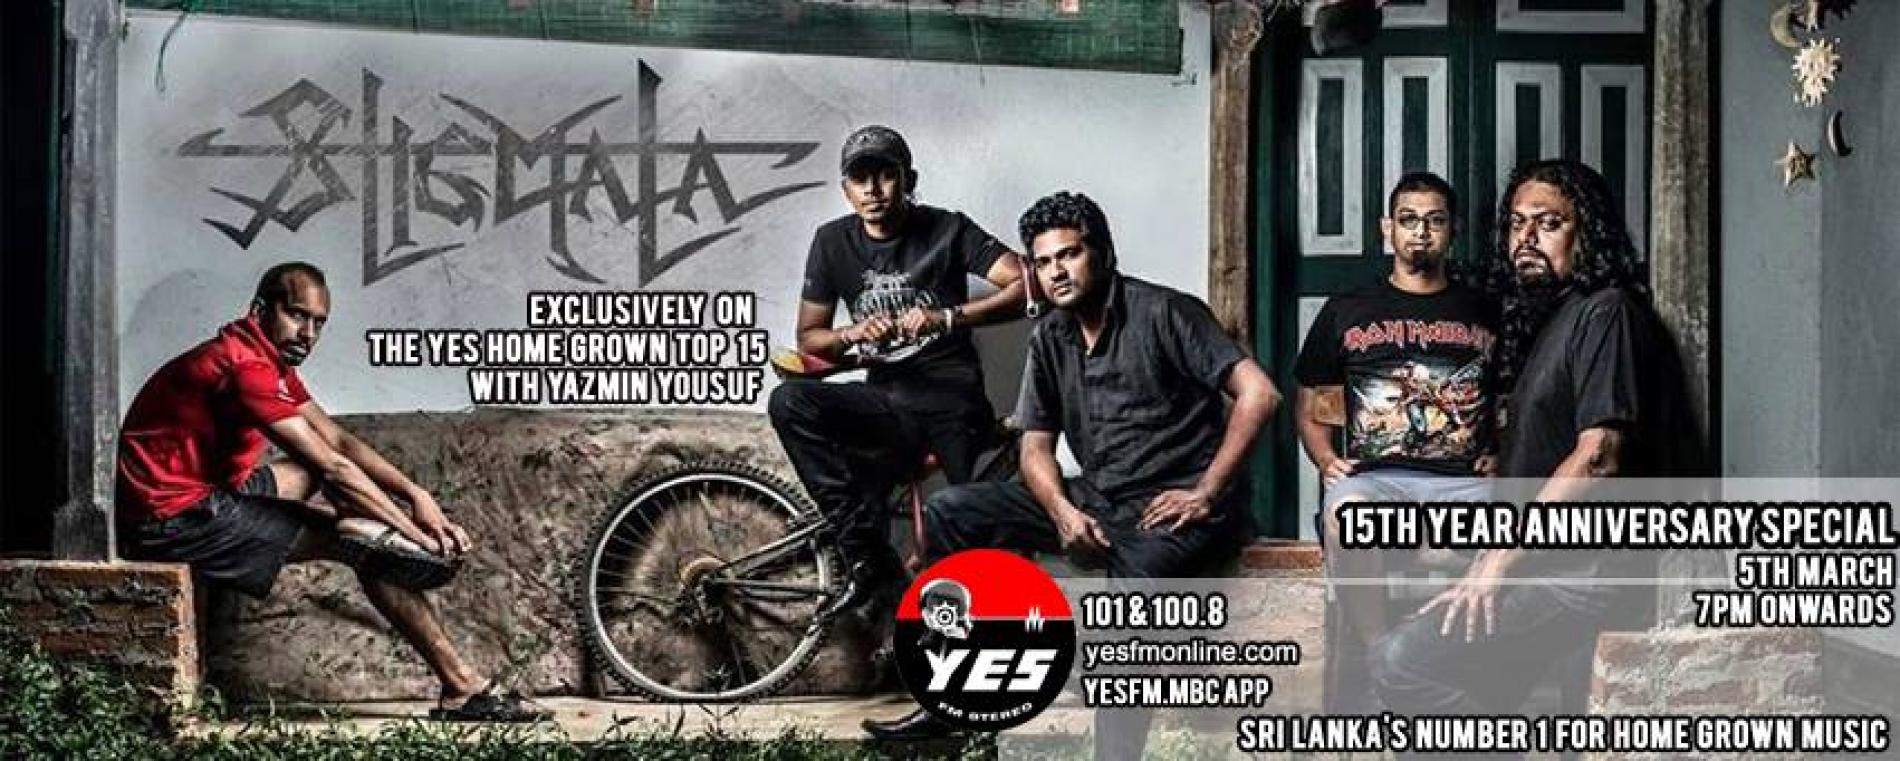 Stigmata On The YES Home Grown Top 15